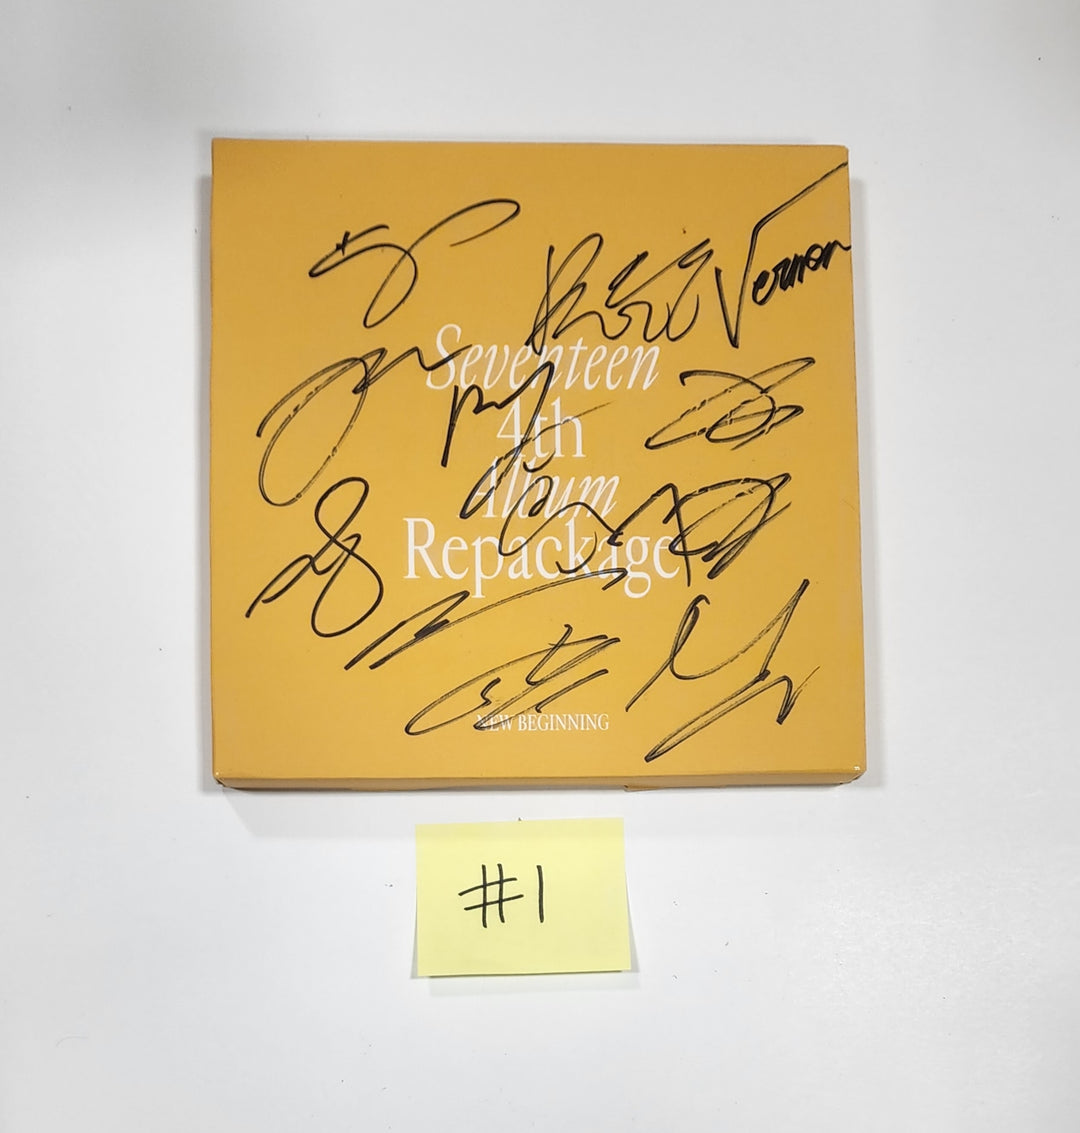 Seventeen 4th Album Repackage "SECTOR 17" - Hand Autographed(Signed) Promo Album